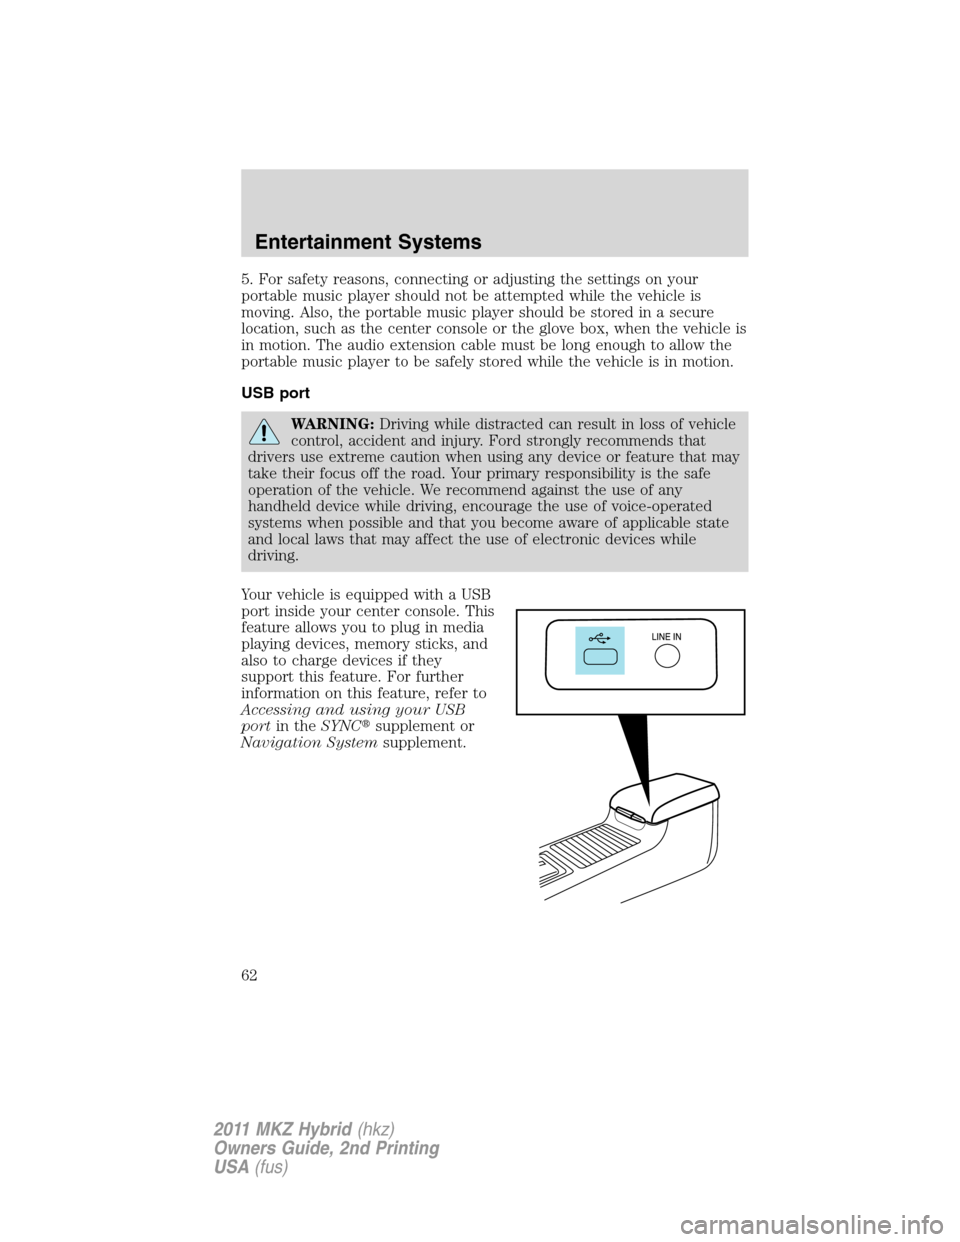 LINCOLN MKZ HYBRID 2011 Owners Manual 5. For safety reasons, connecting or adjusting the settings on your
portable music player should not be attempted while the vehicle is
moving. Also, the portable music player should be stored in a sec